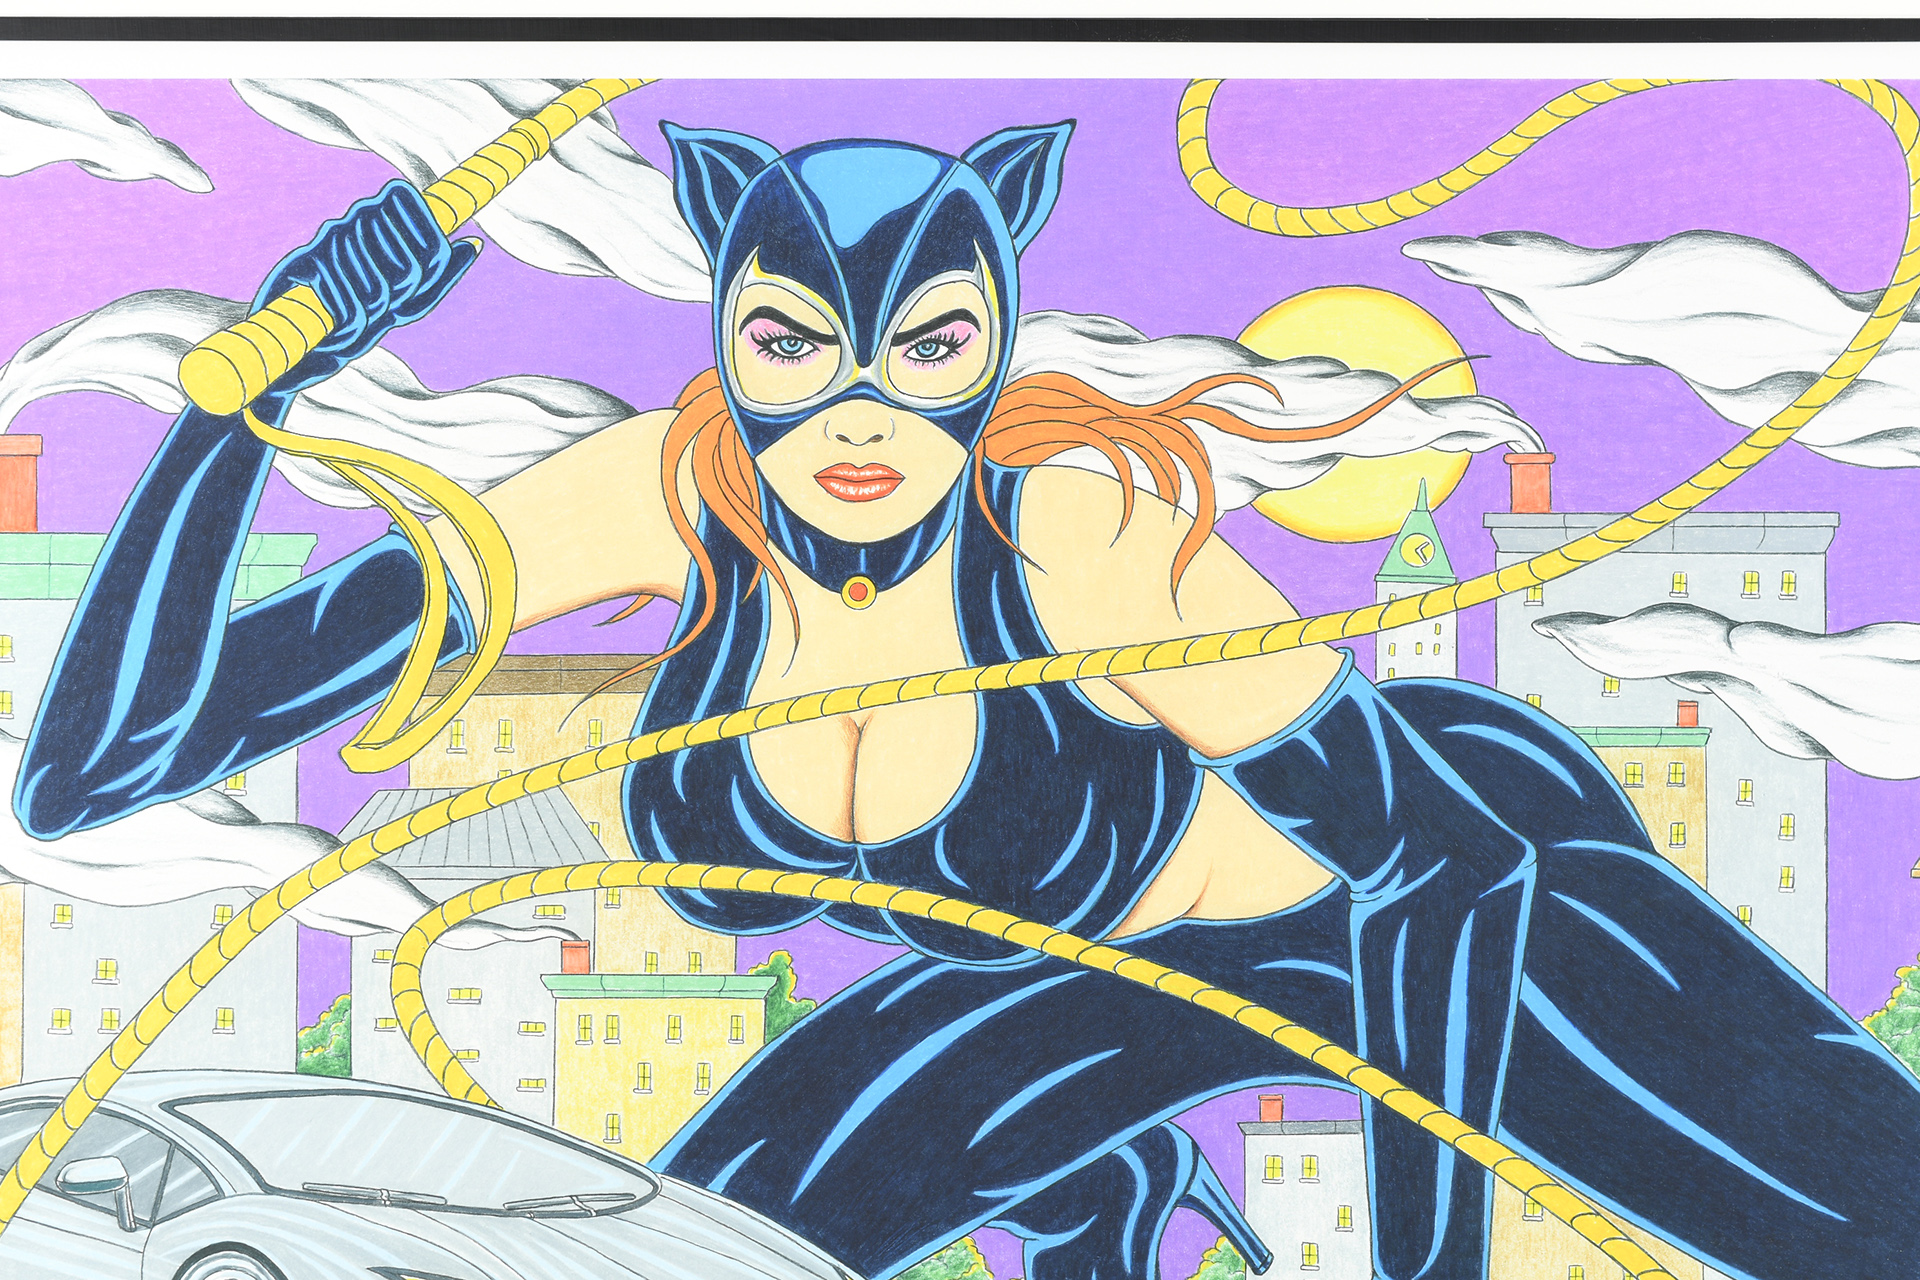 Limited Edition by Joe Chierchio "Catwoman"